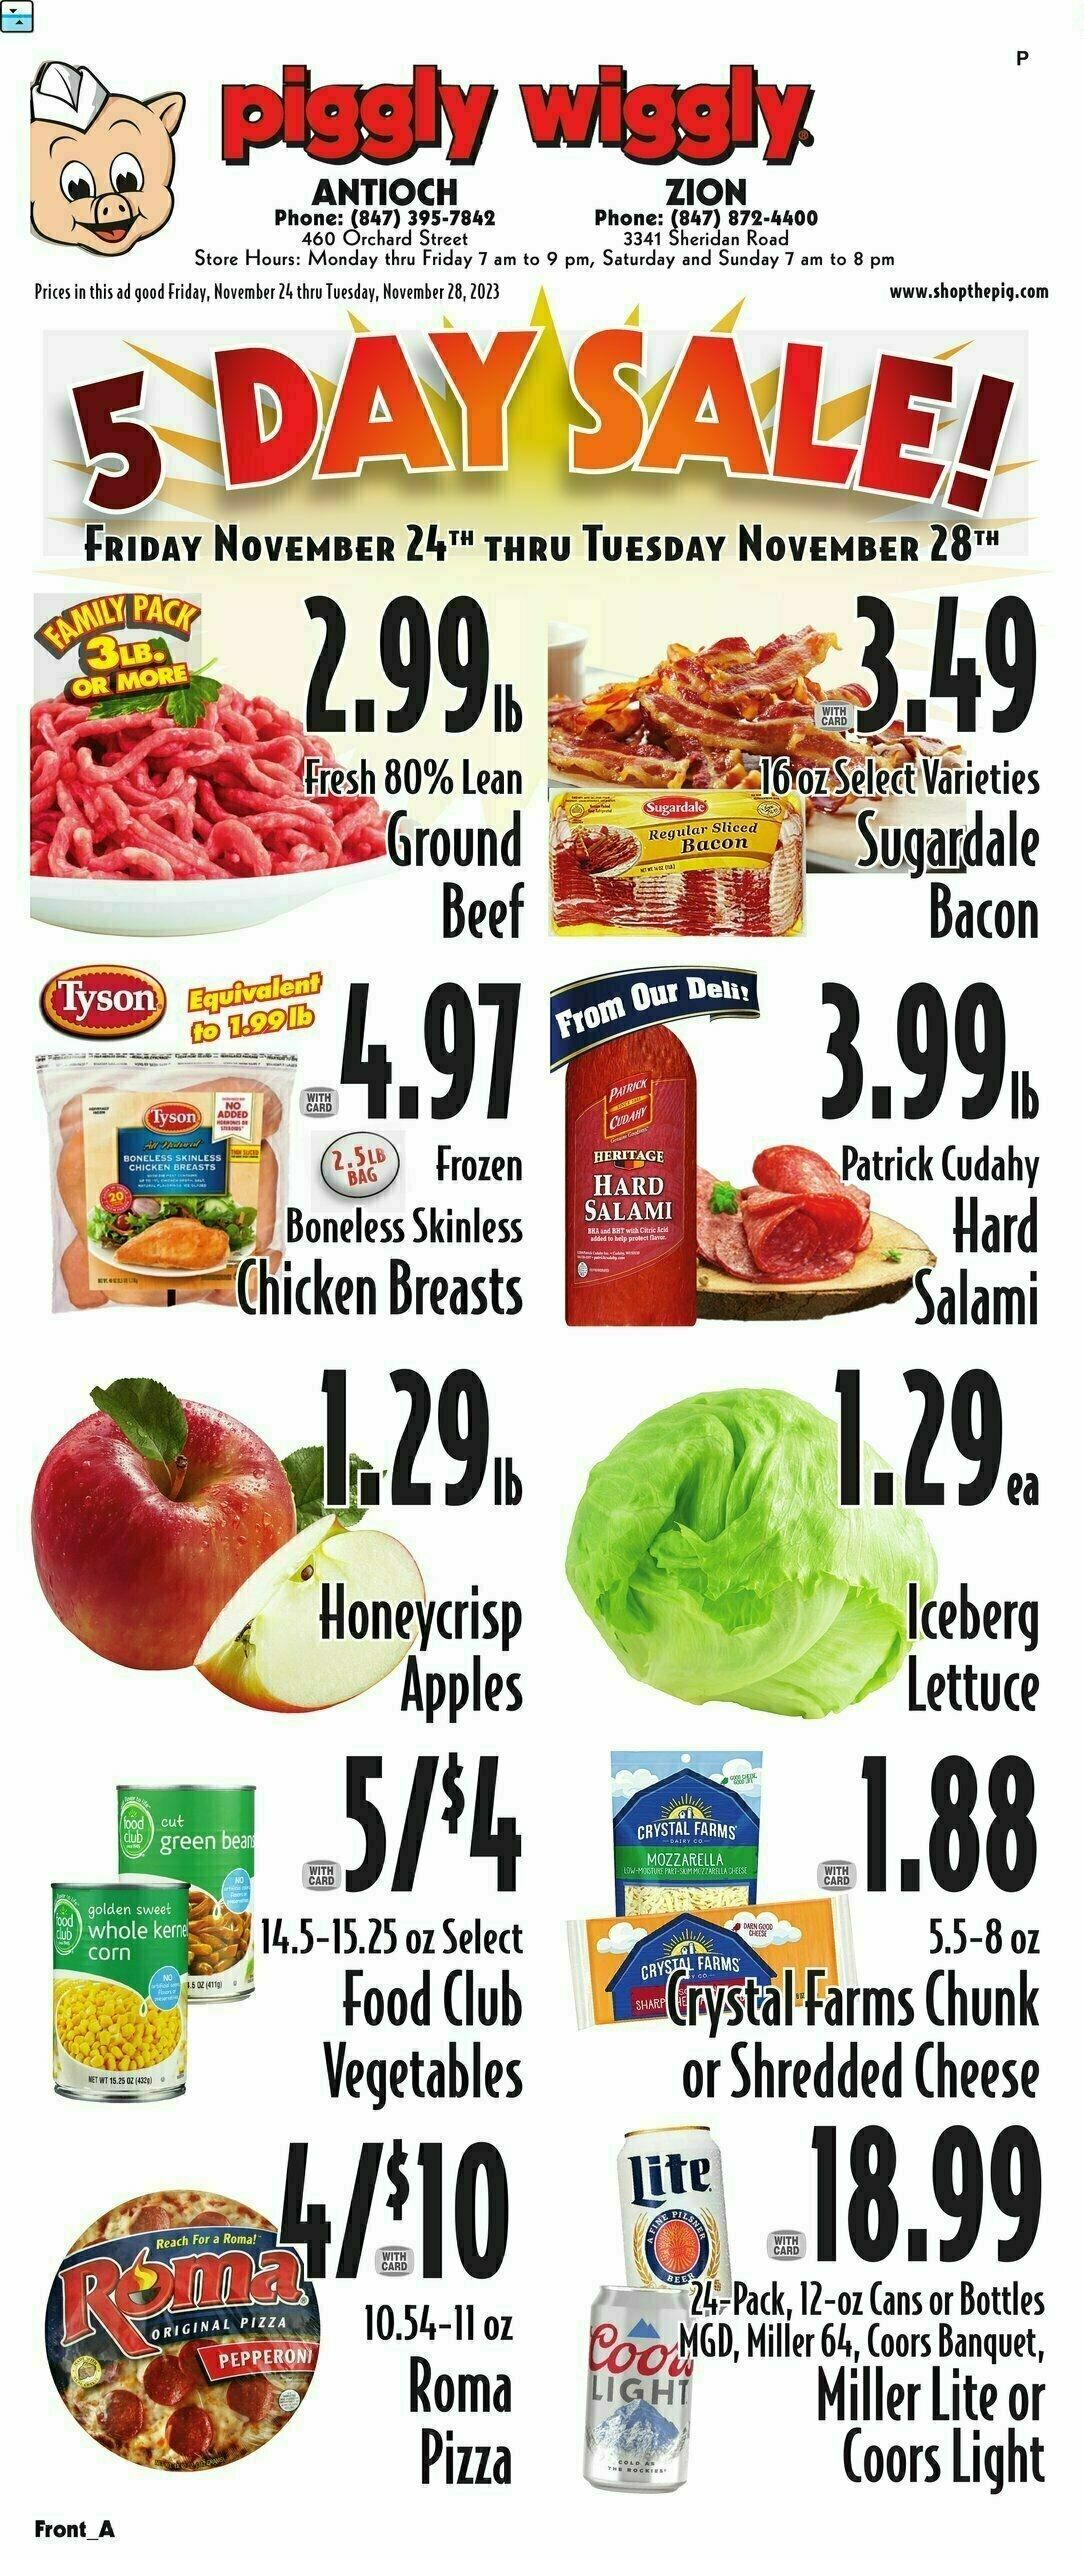 Piggly Wiggly Weekly Ad from November 24